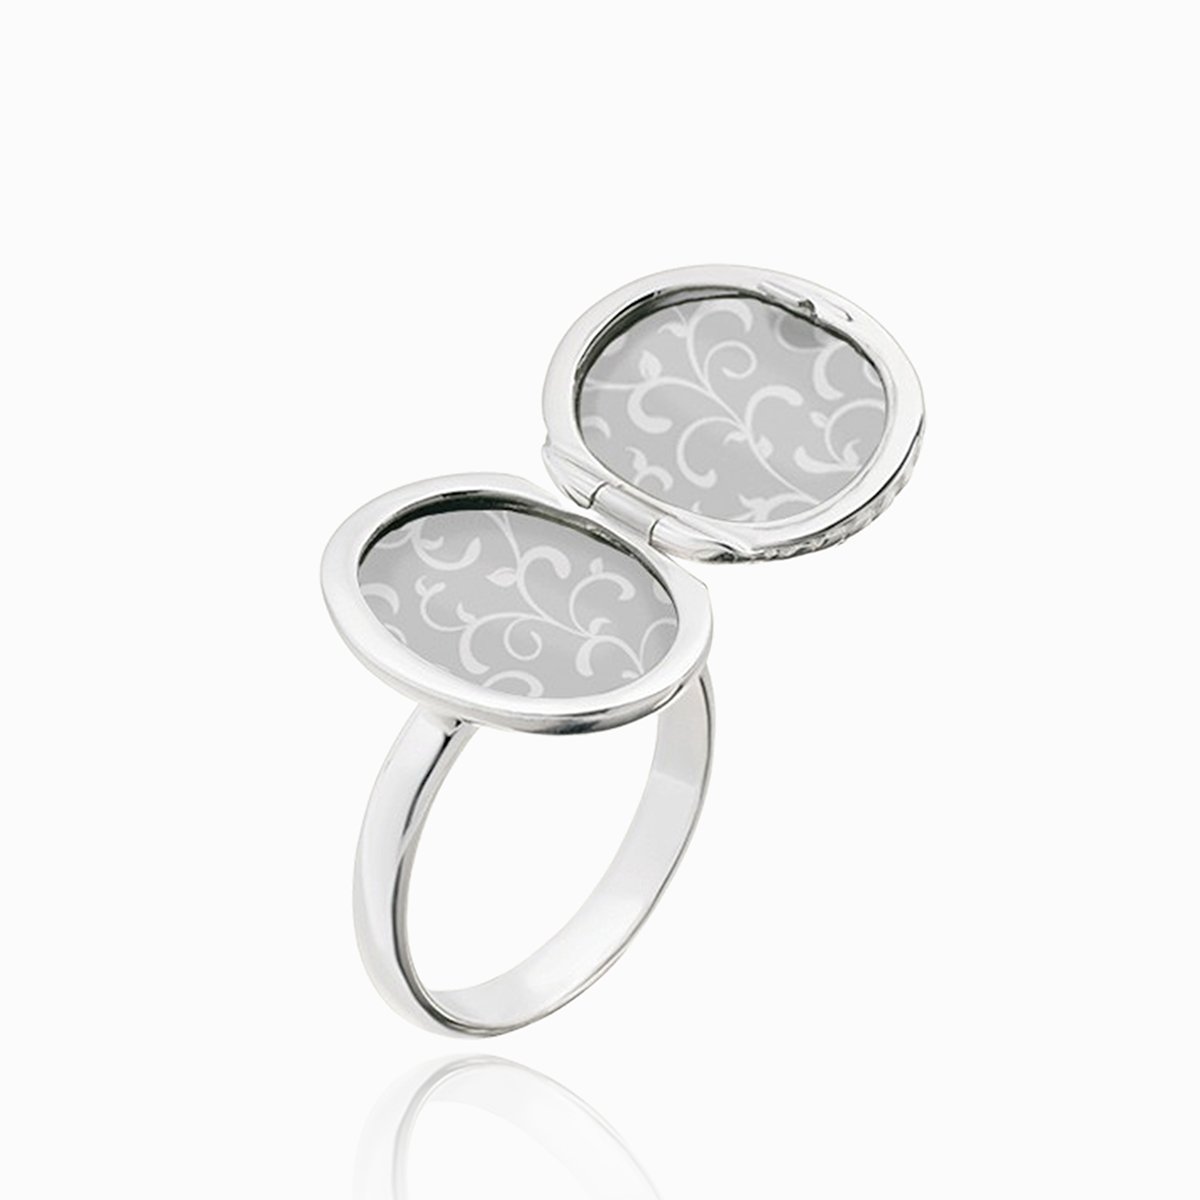 Product title: Mother of Pearl Locket Ring, product type: Ring